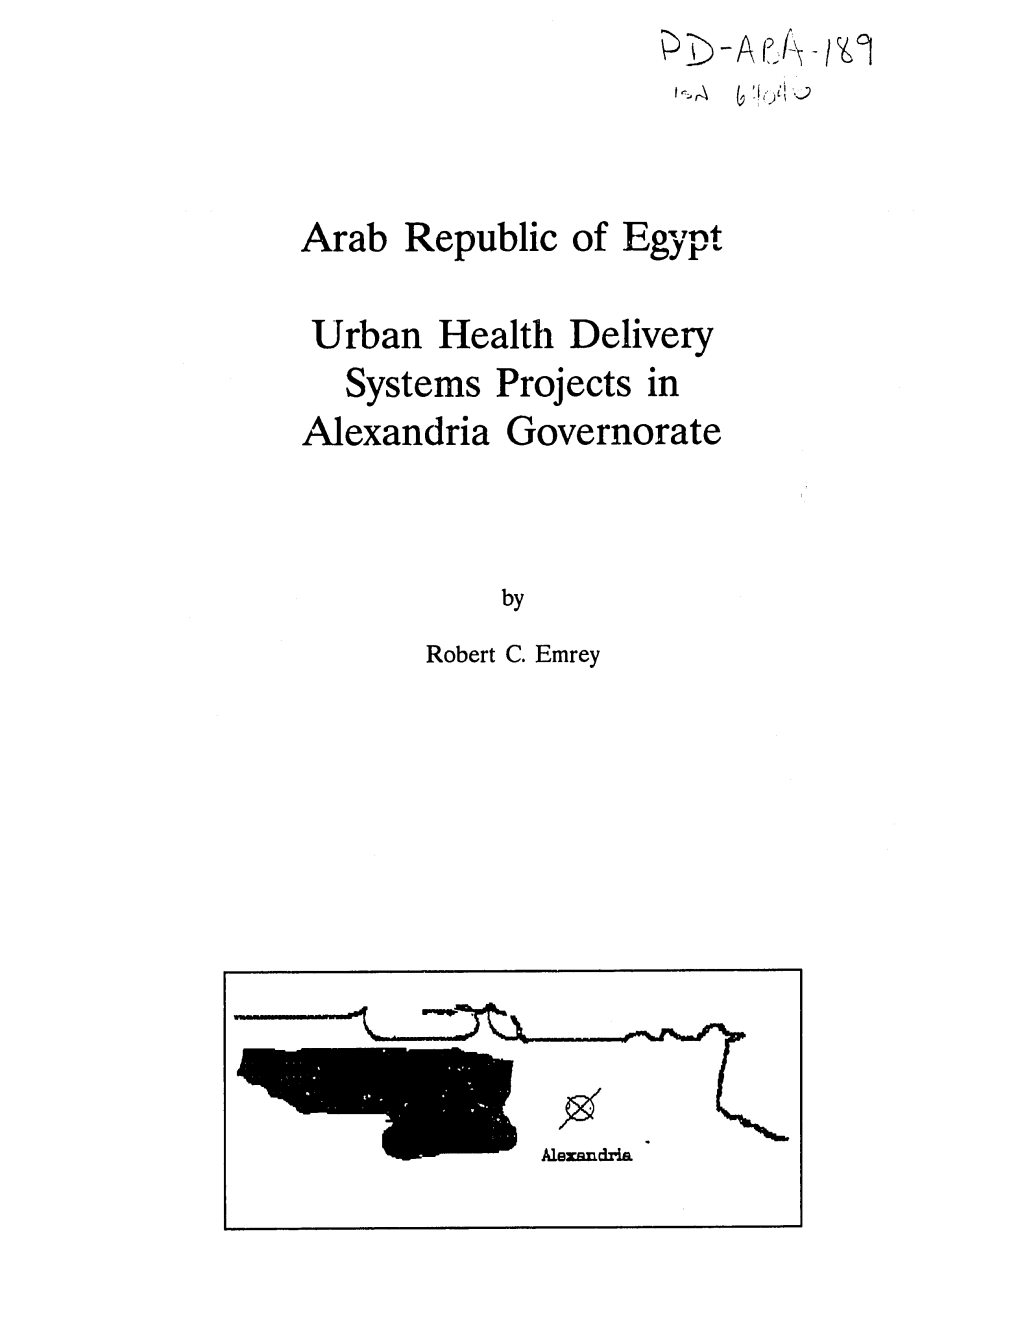 Urban Health Delivery Systems Projects in Alexandria Governorate